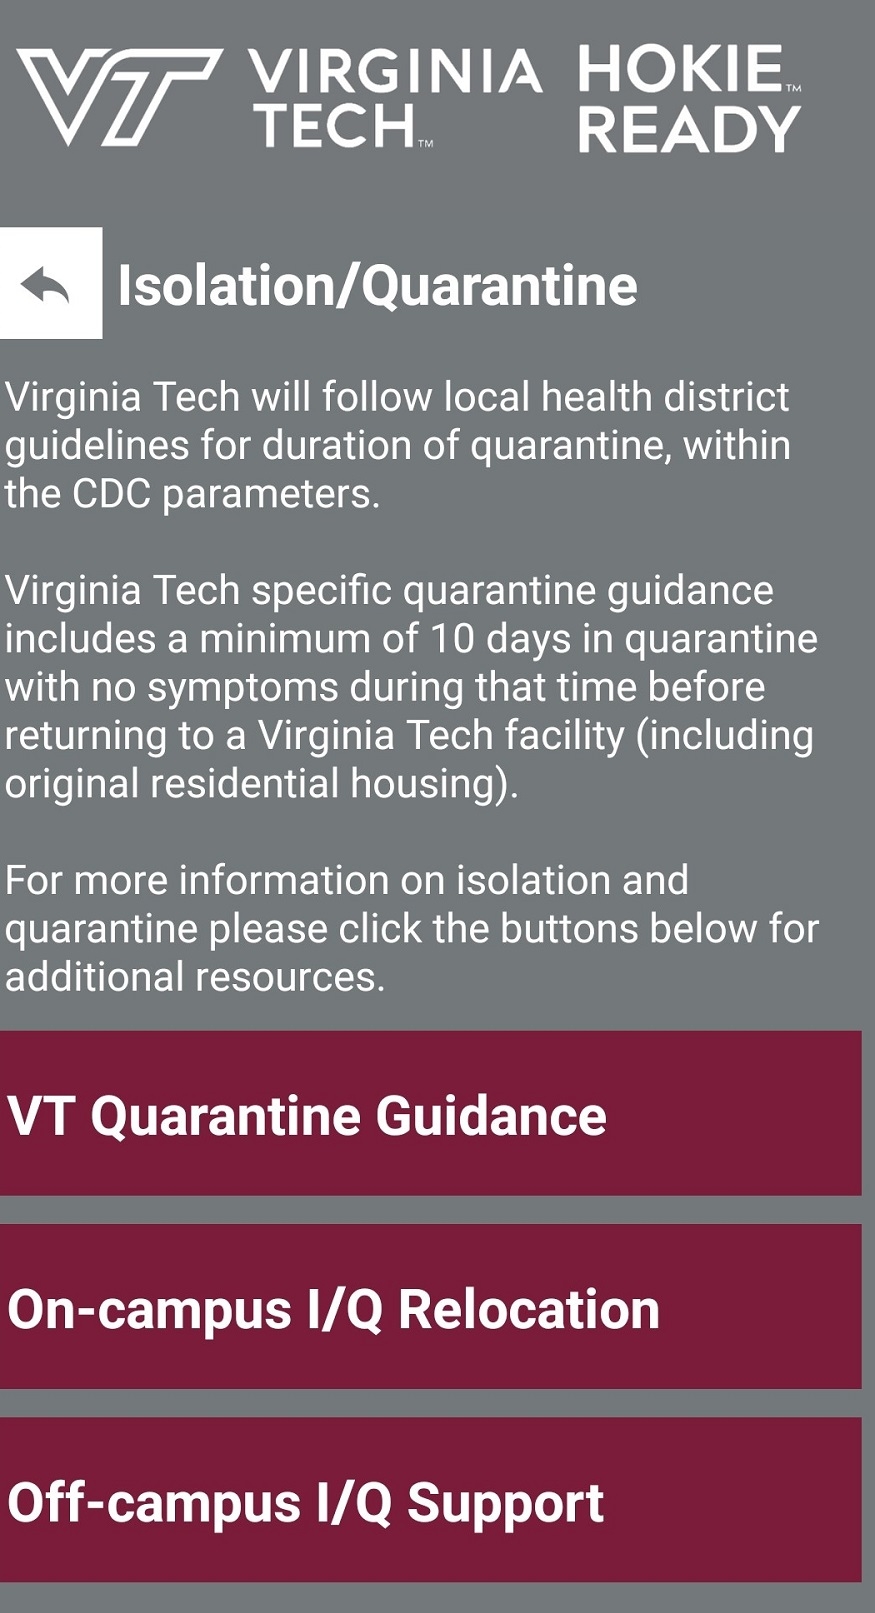 Screenshot of isolatioon and quarantine resources within Hokie Ready app